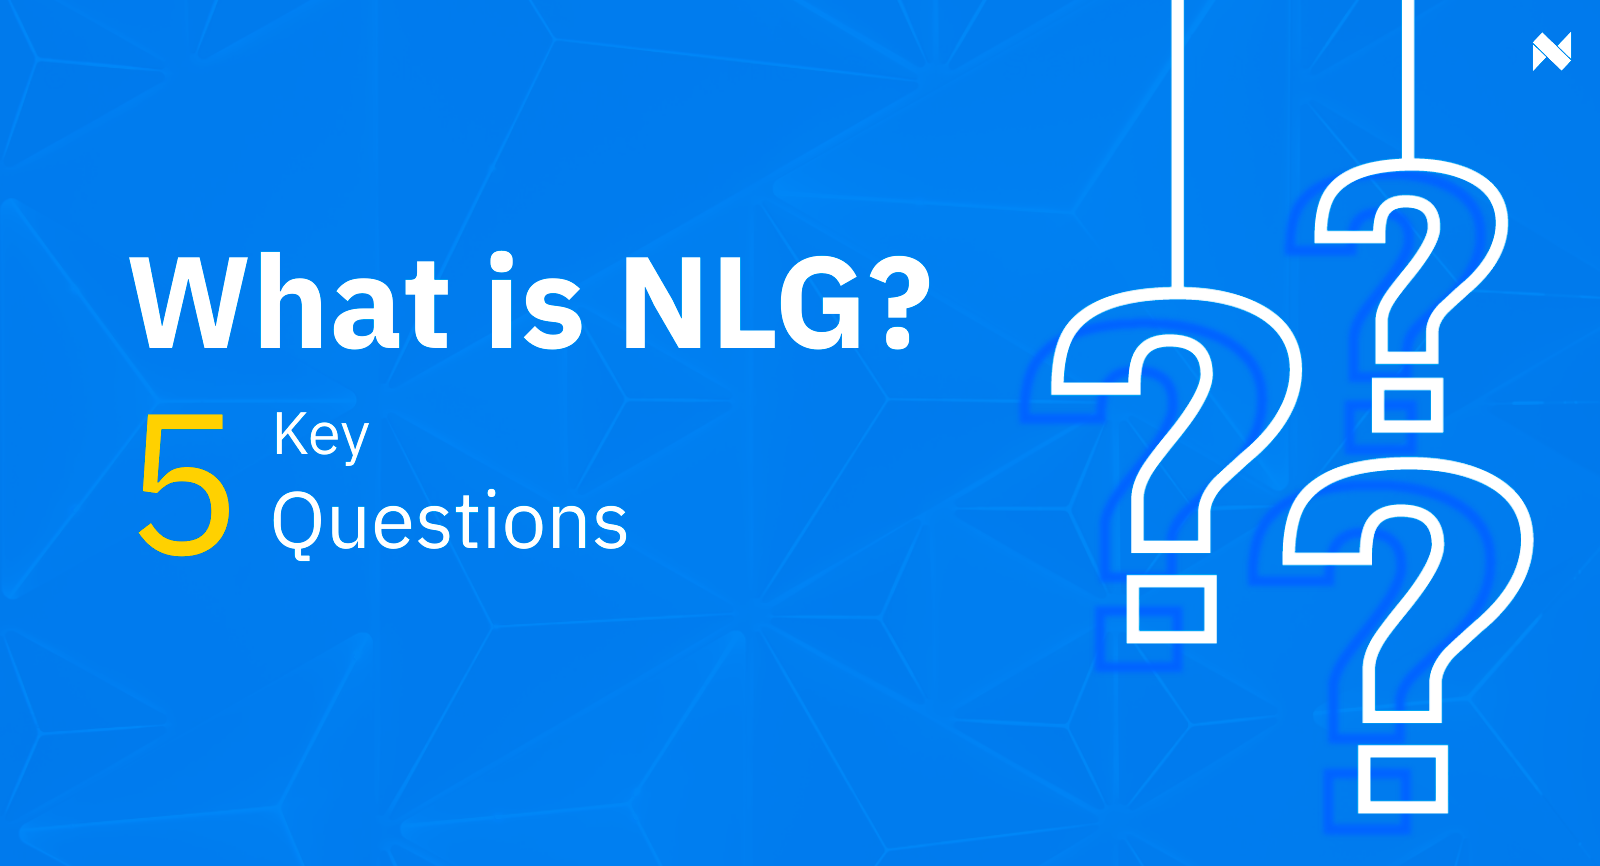 NLG is a subfield of artificial intelligence.